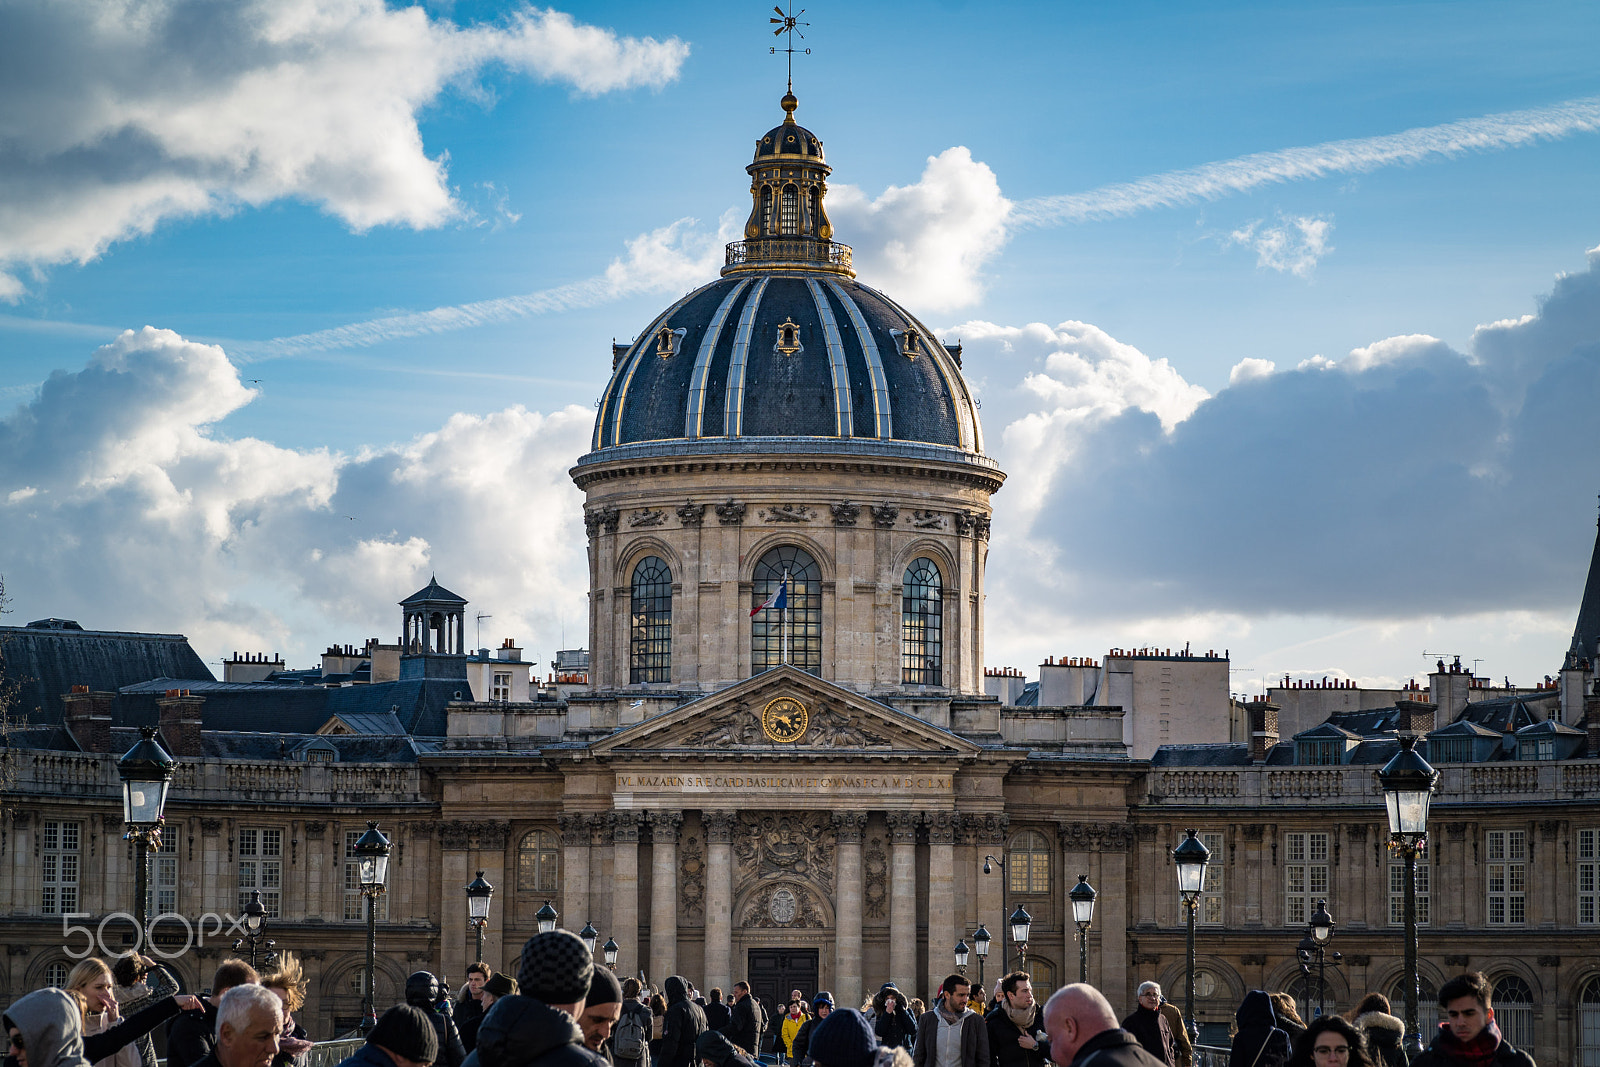 Sony a6500 sample photo. Institut de france i photography